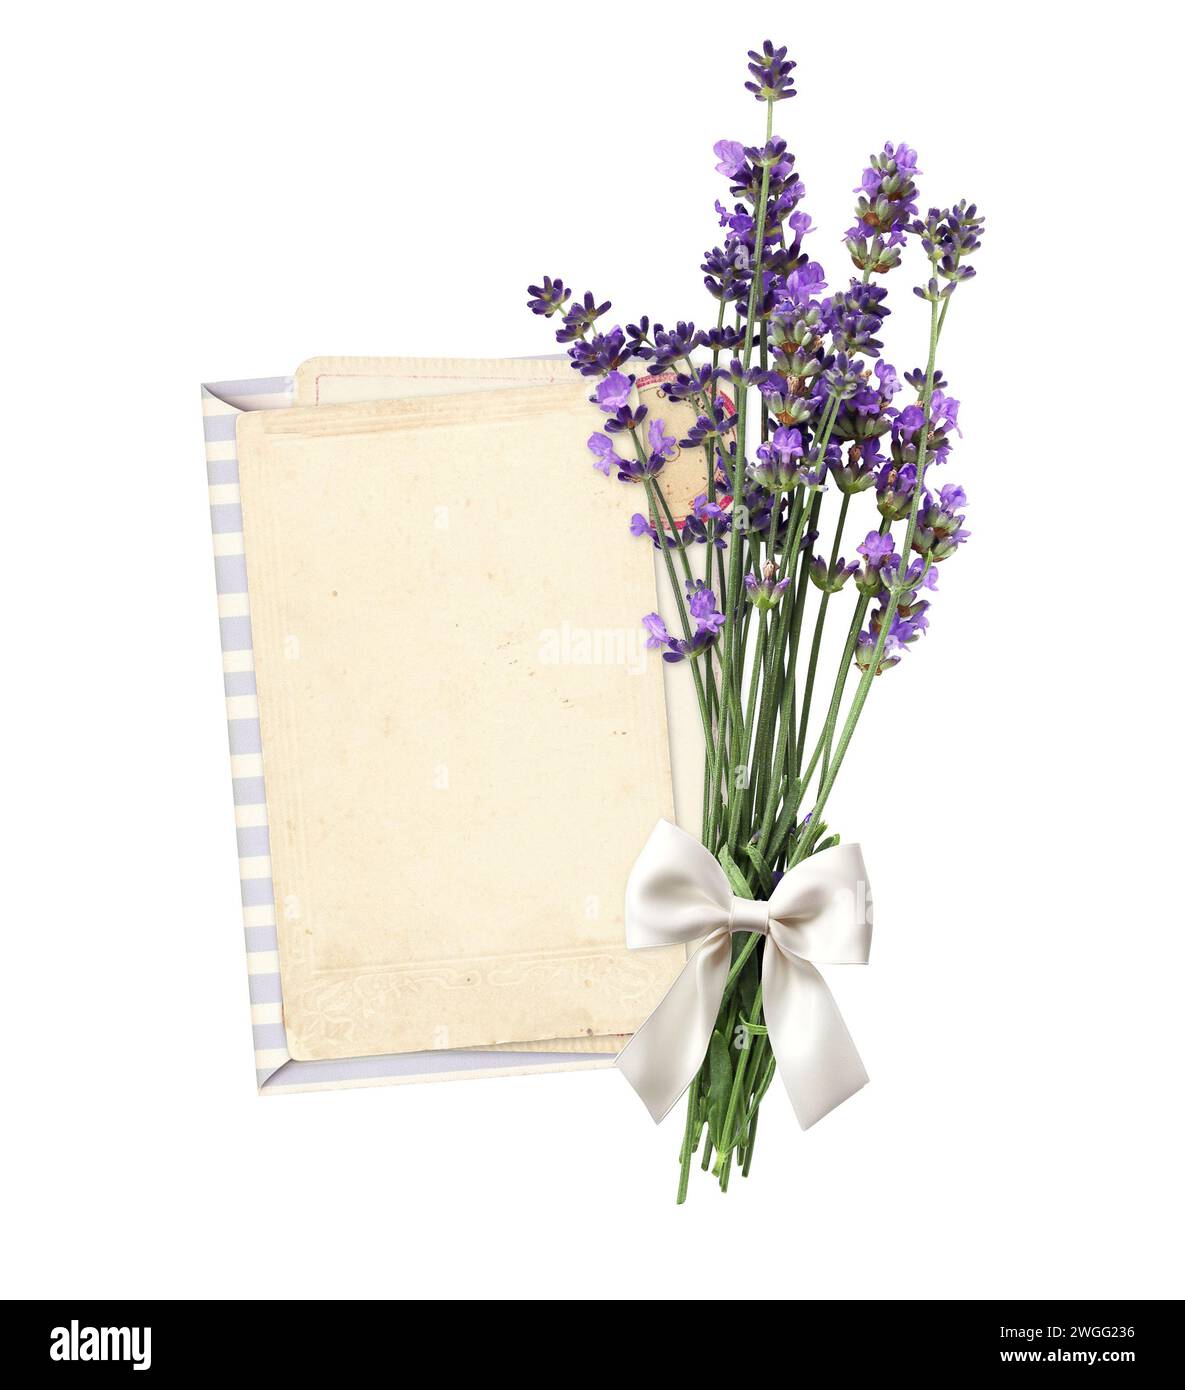 Blank paper card and bouquet of purple lavender flower, tied with a white bow. Bunch of fresh lavandula flowers. Isolated on white background. Mockup Stock Photo